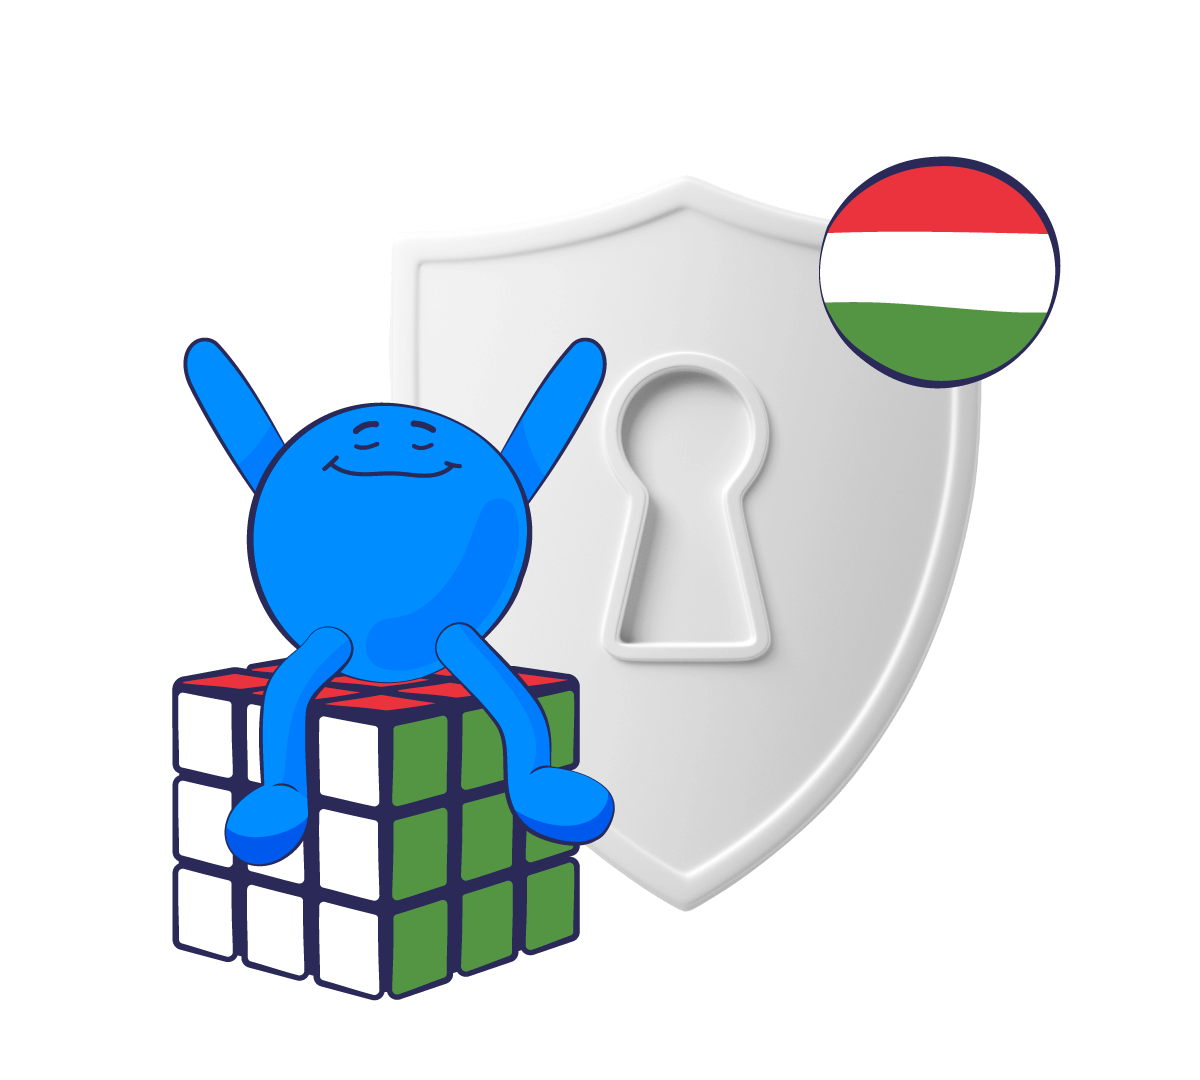 Only private moments with Hungary VPN